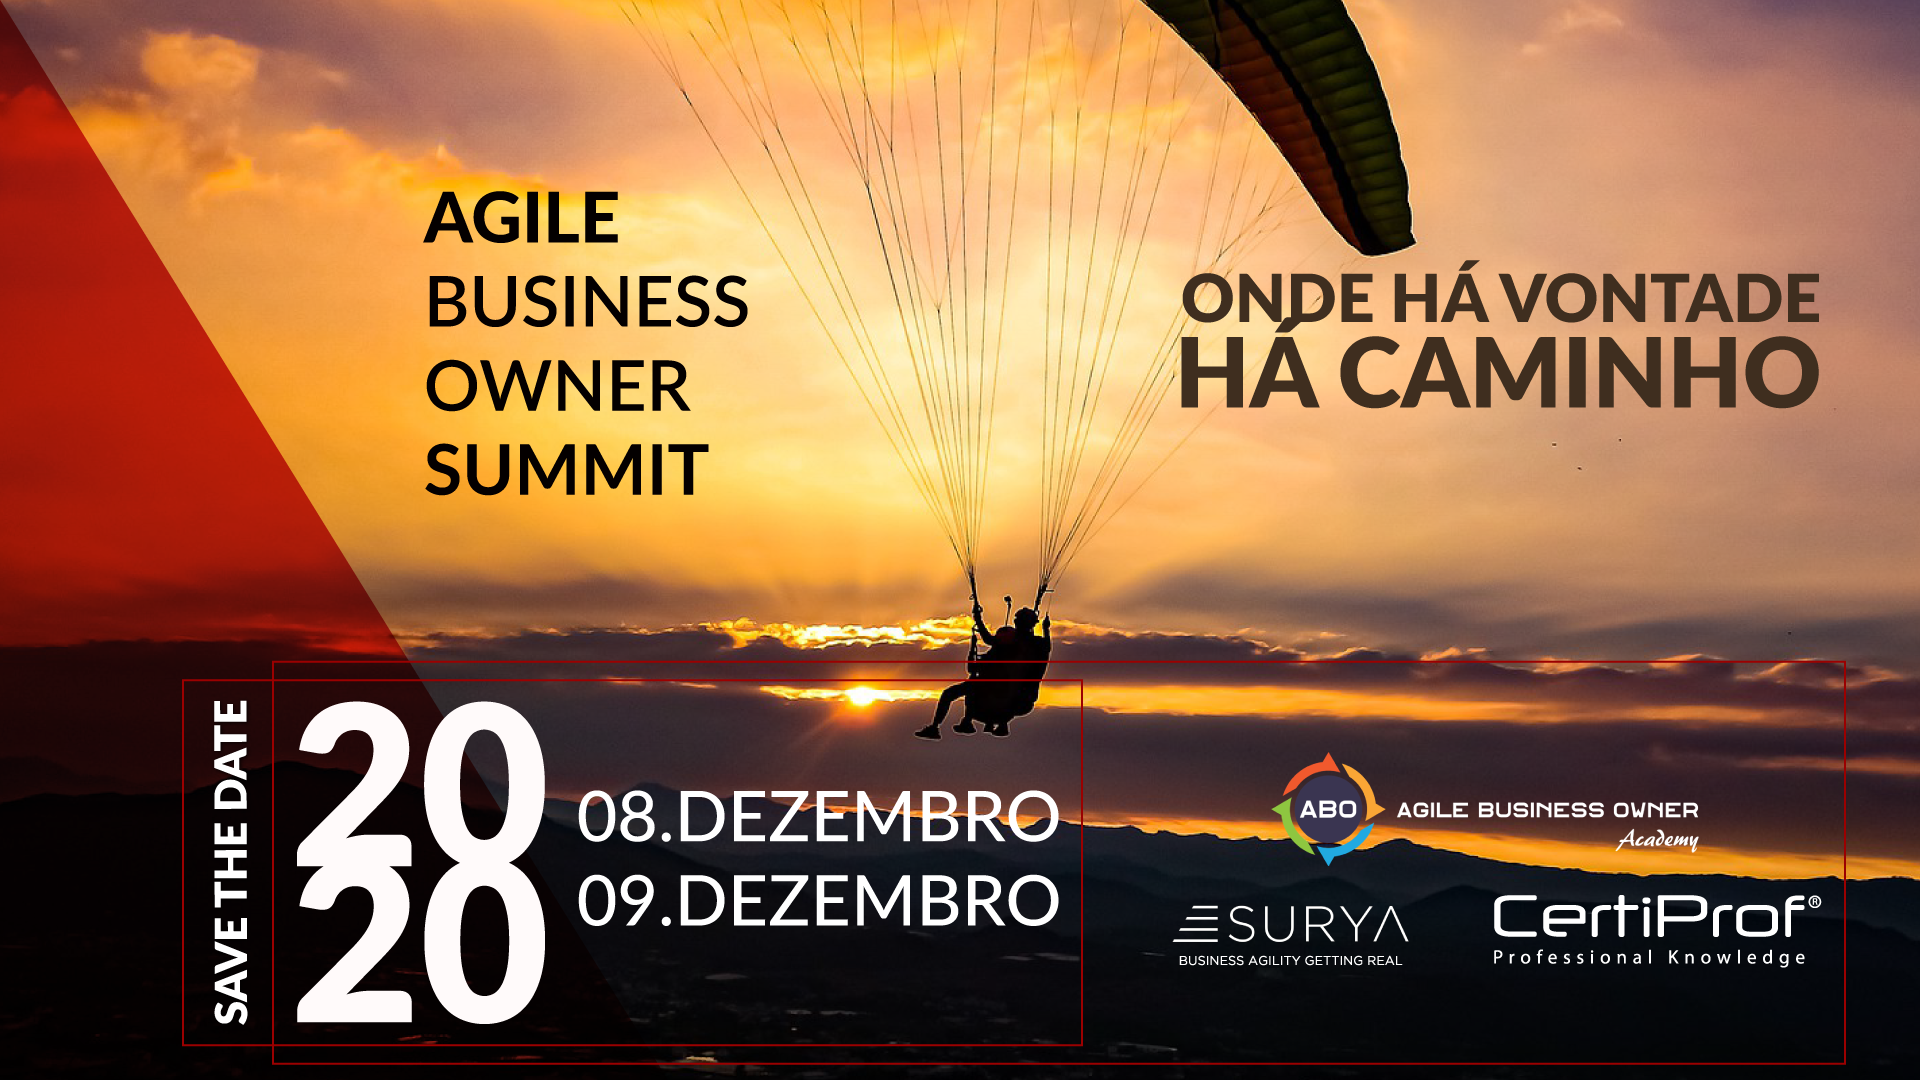 agile business owner summit certiprof